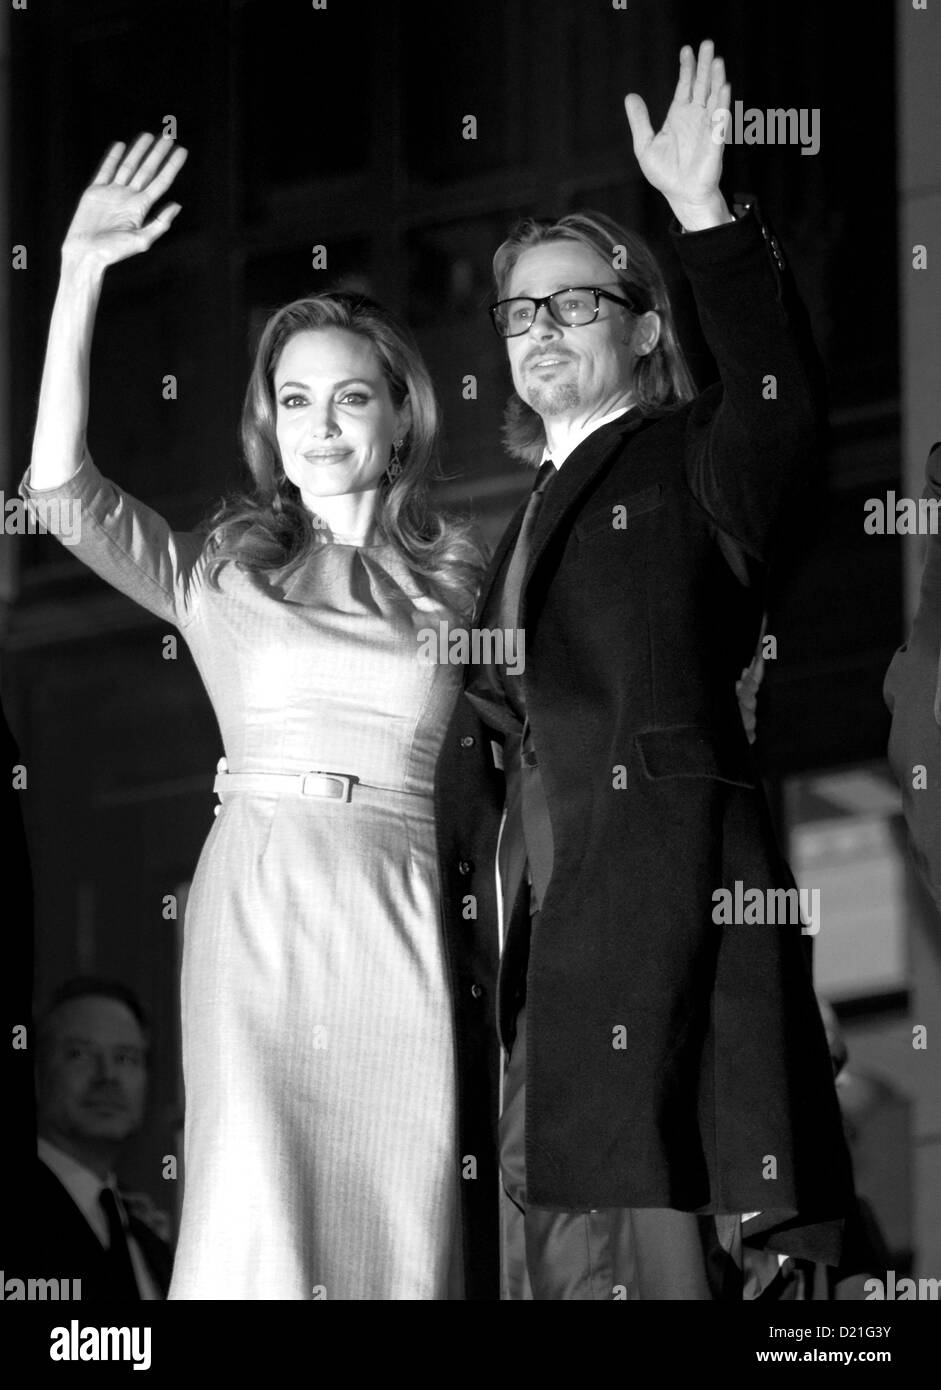 The U.S. Amercian actors Angelina Jolie and Brad Pitt attend the Cinema for Peace Gala at Gendarmenmarkt in Berlin, Germany, 13 February 2012. The gala is part of the Berlin International Film Festival, Berlinale. Photo: Herbert Knosowski (black and white only) Stock Photo